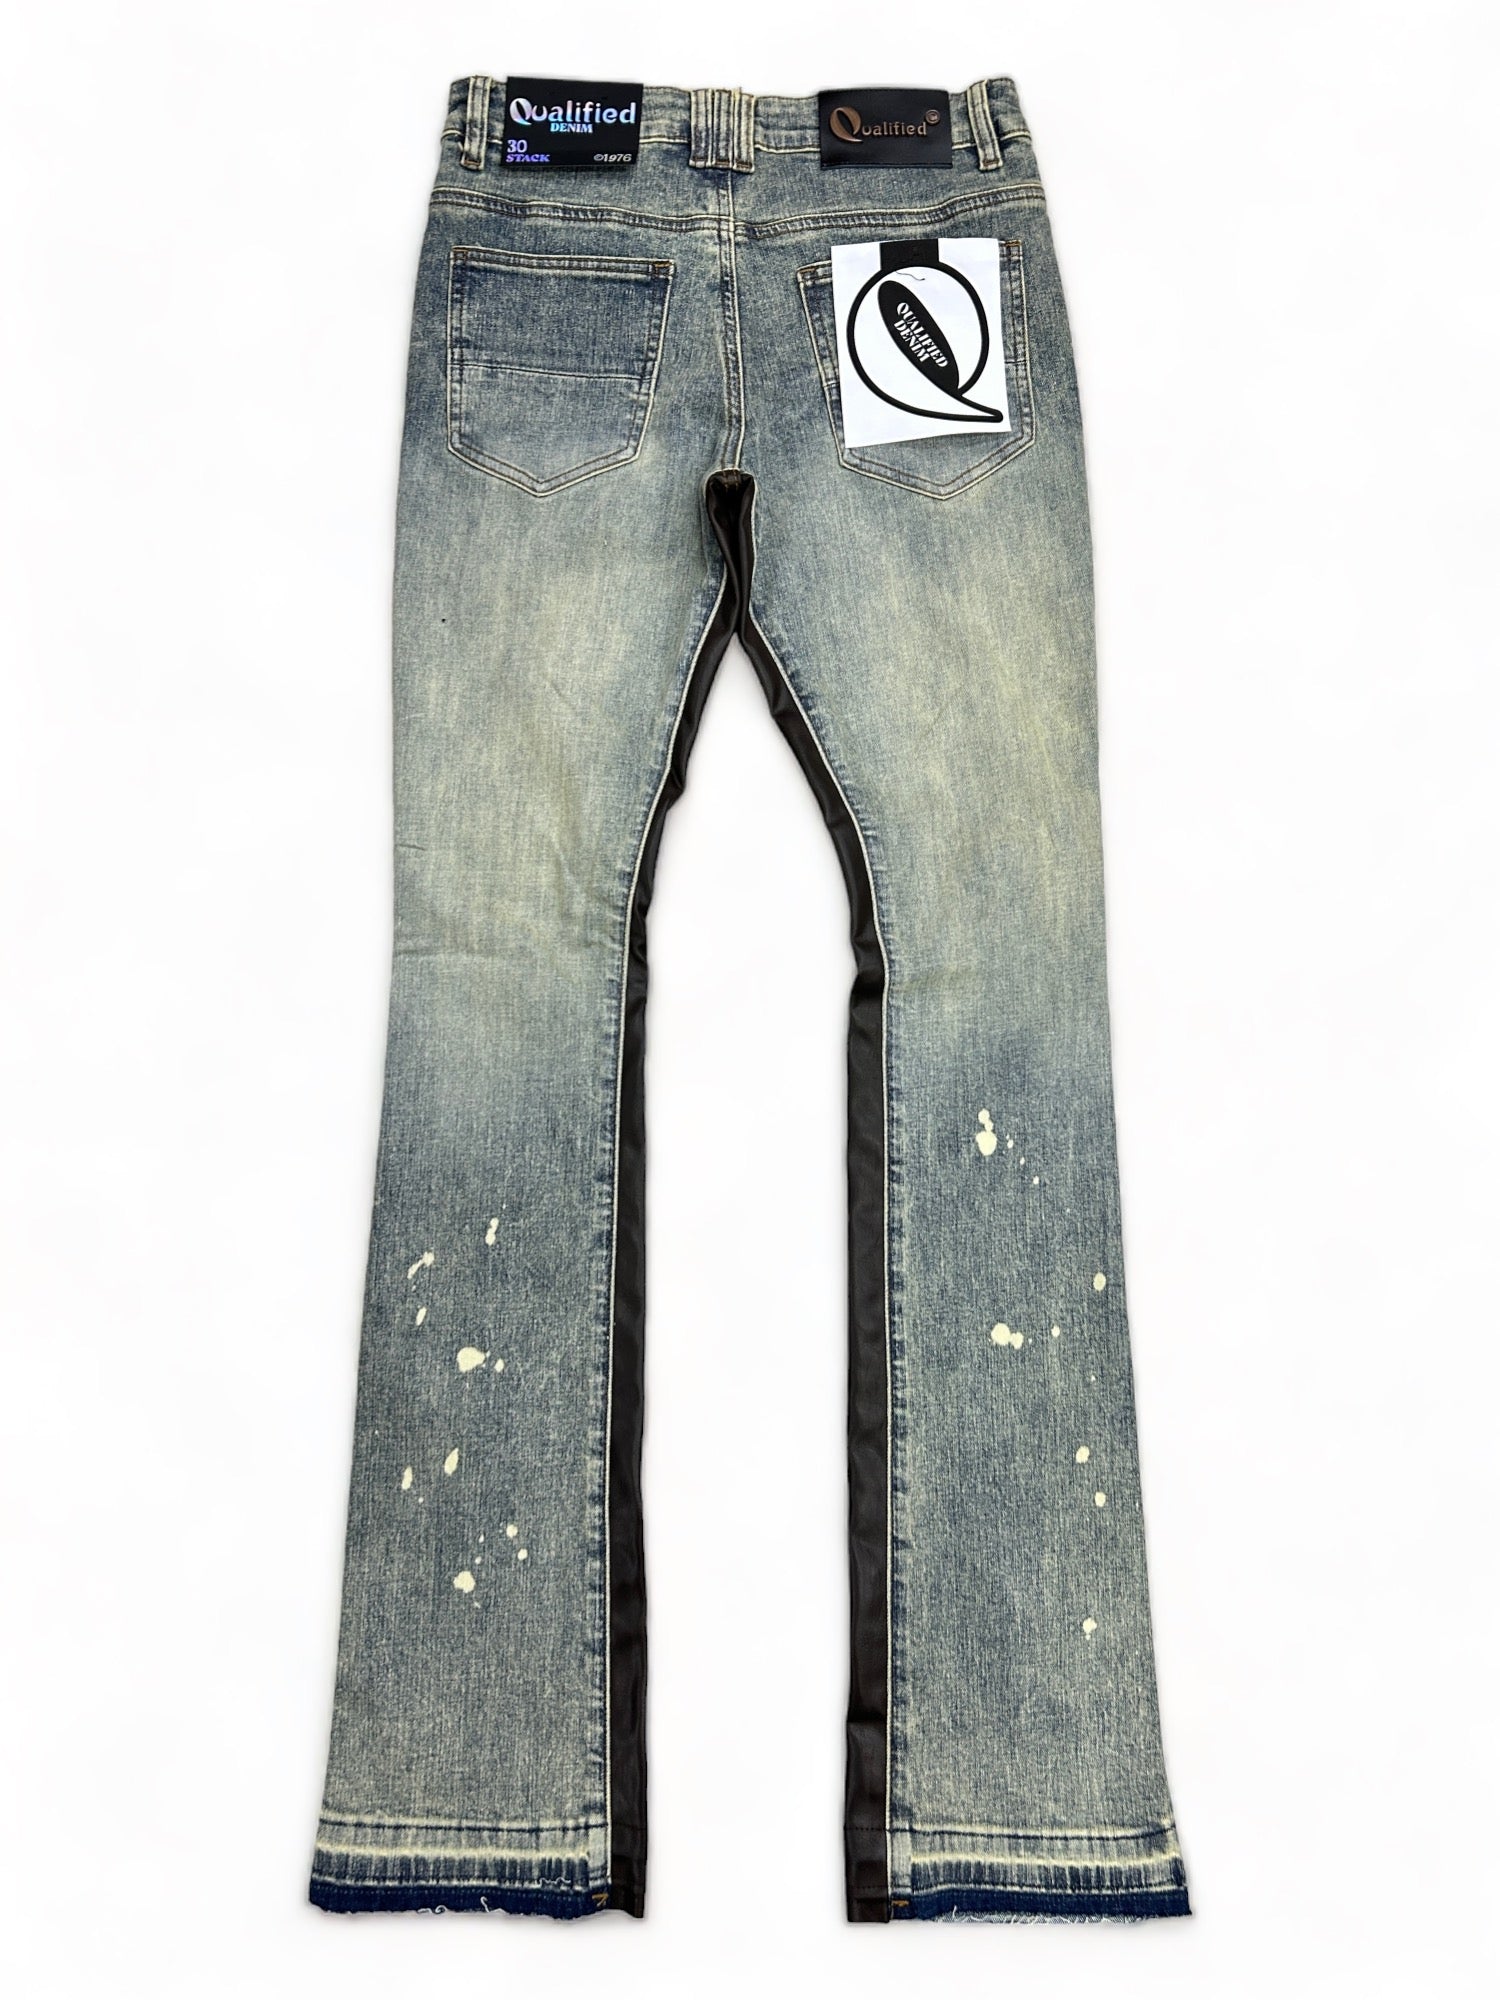 Qualified Denim Premium Stacked Light Washed Jeans